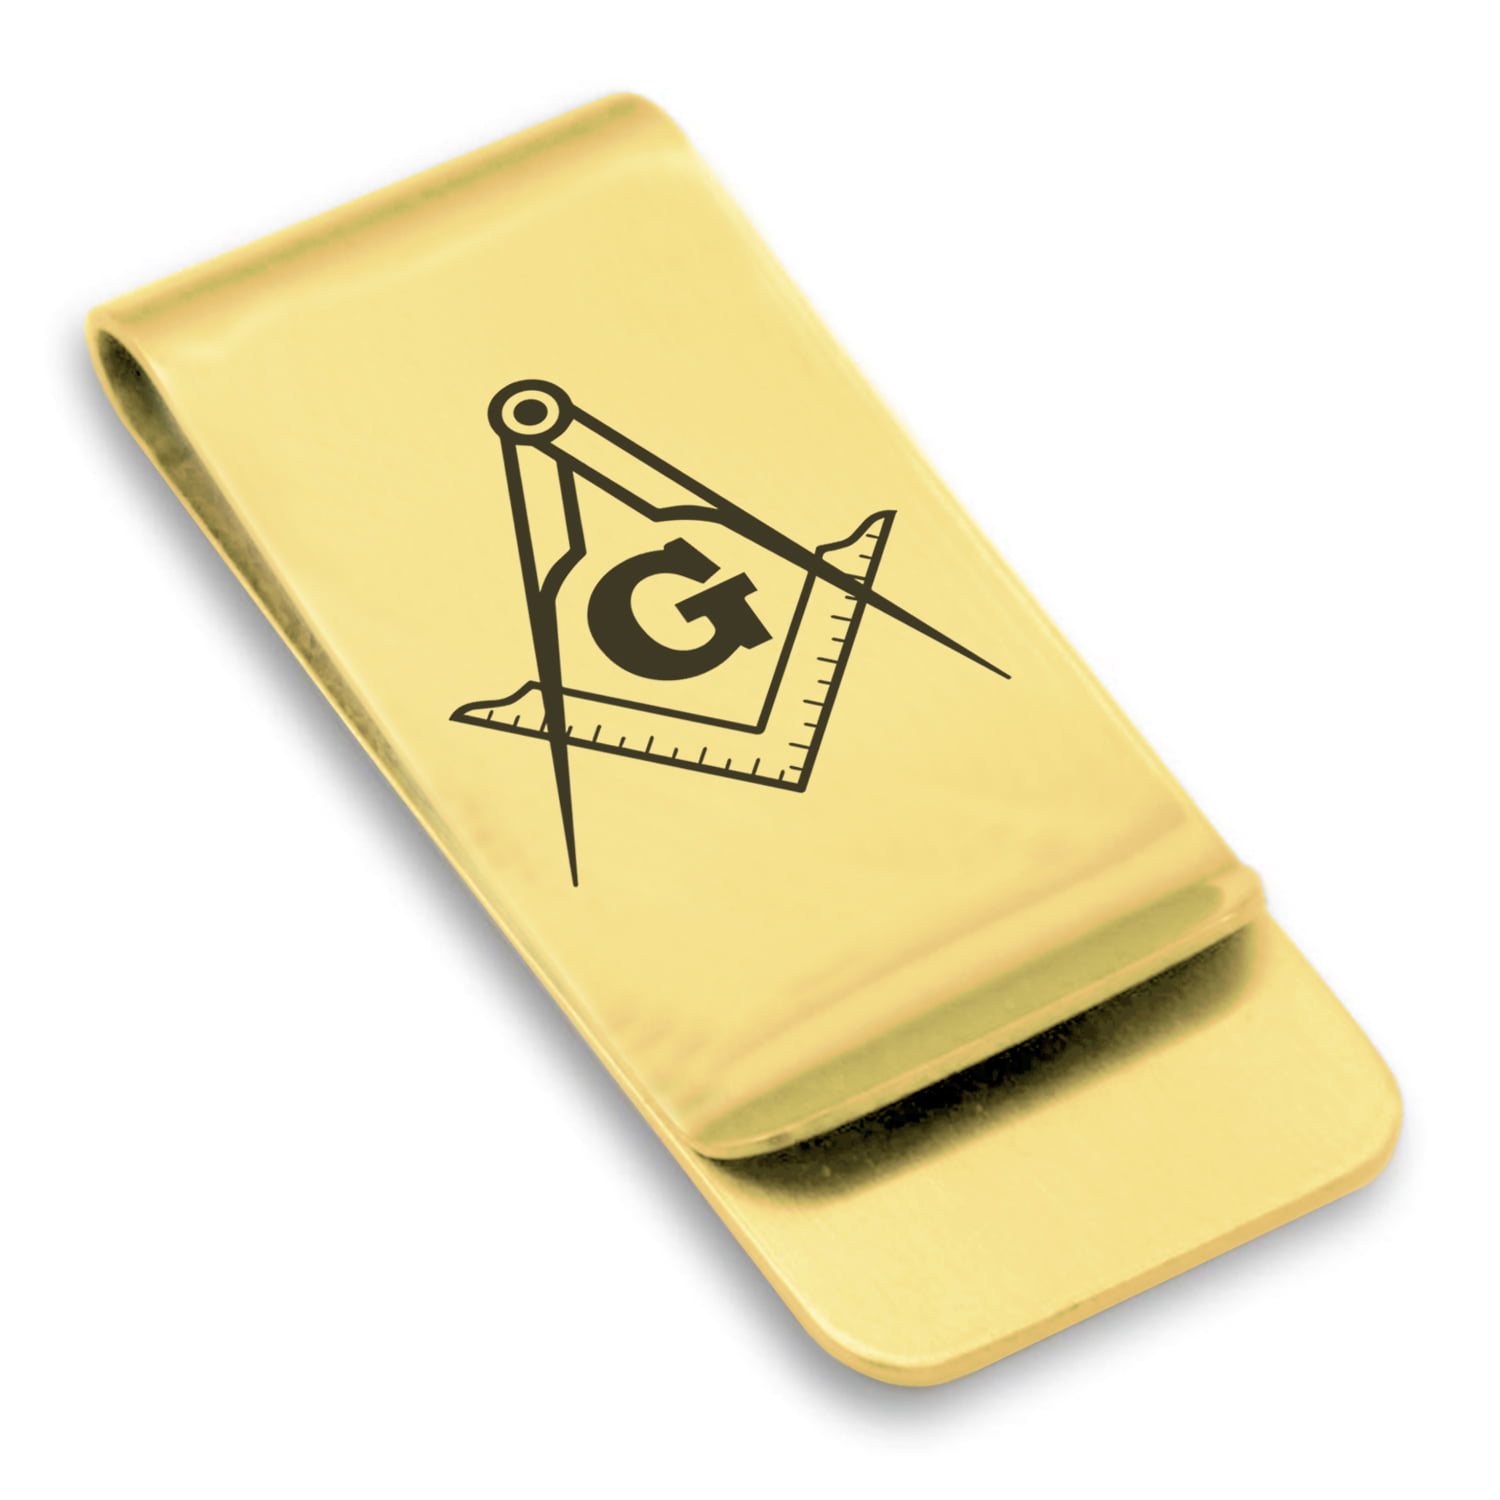 Stainless Steel Masonic Square and Compass Symbol Classic Slim Money Clip Credit Card Holder